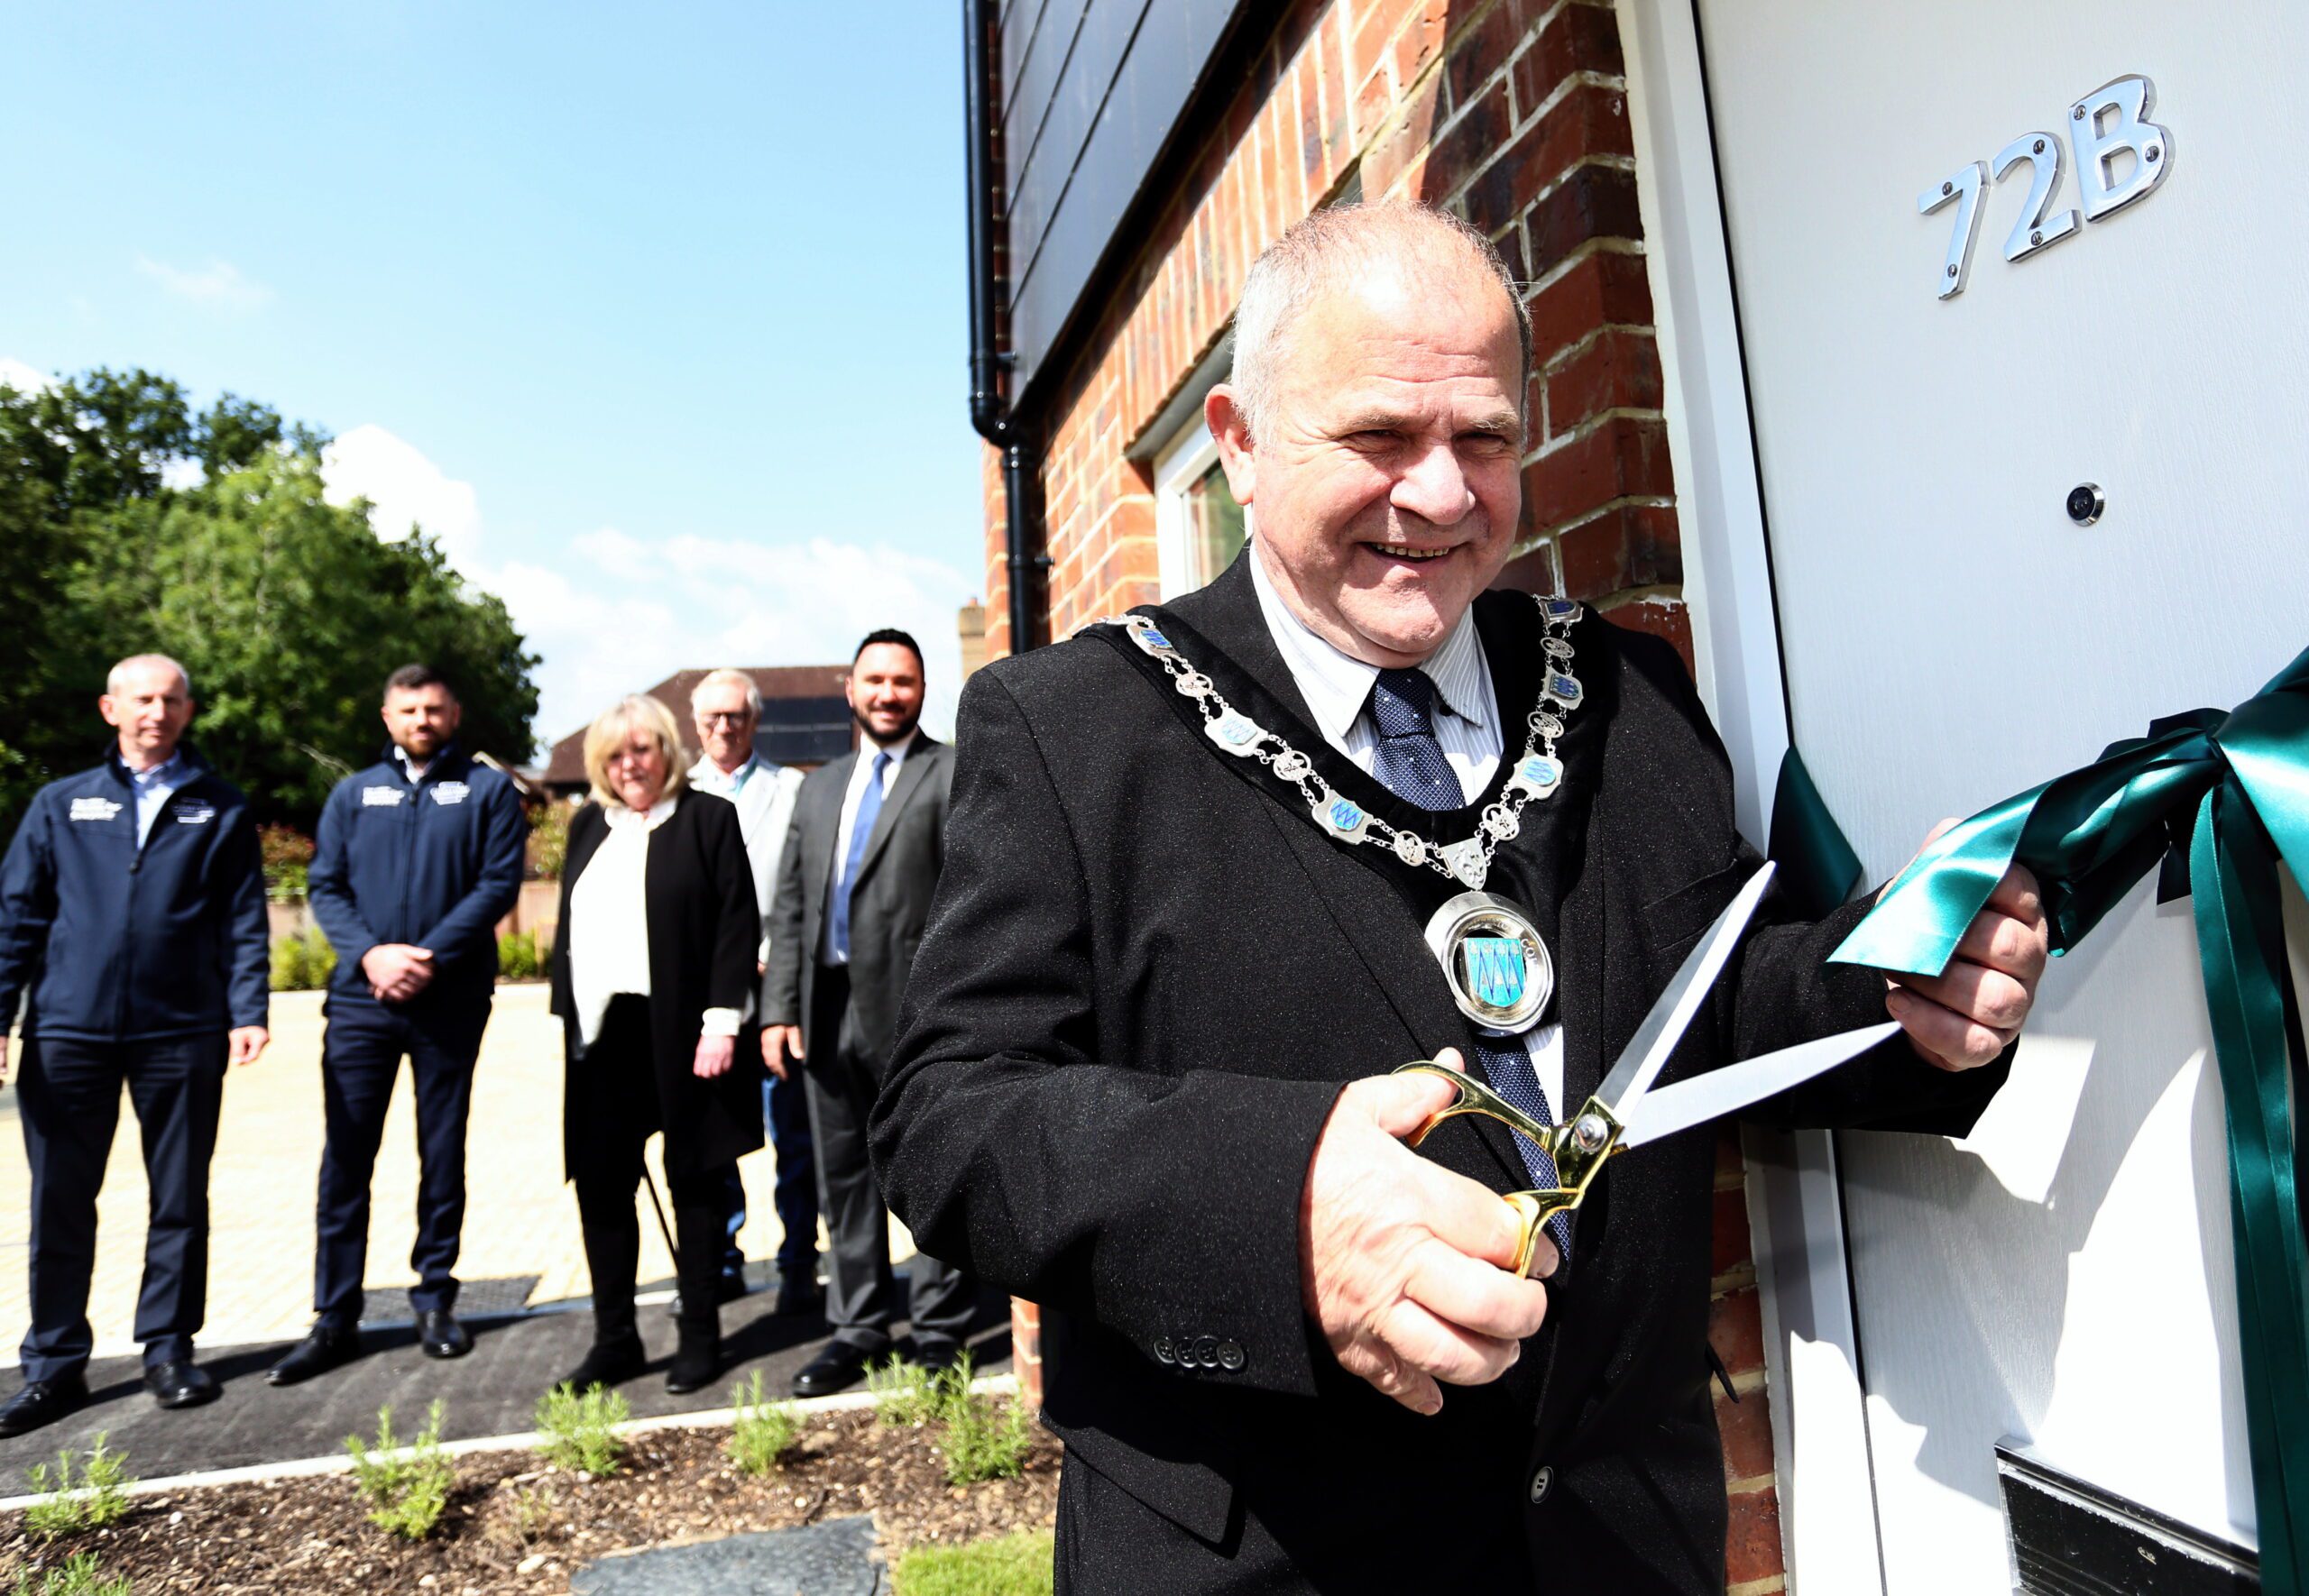 Chartway complete new homes for Sevenoaks Council